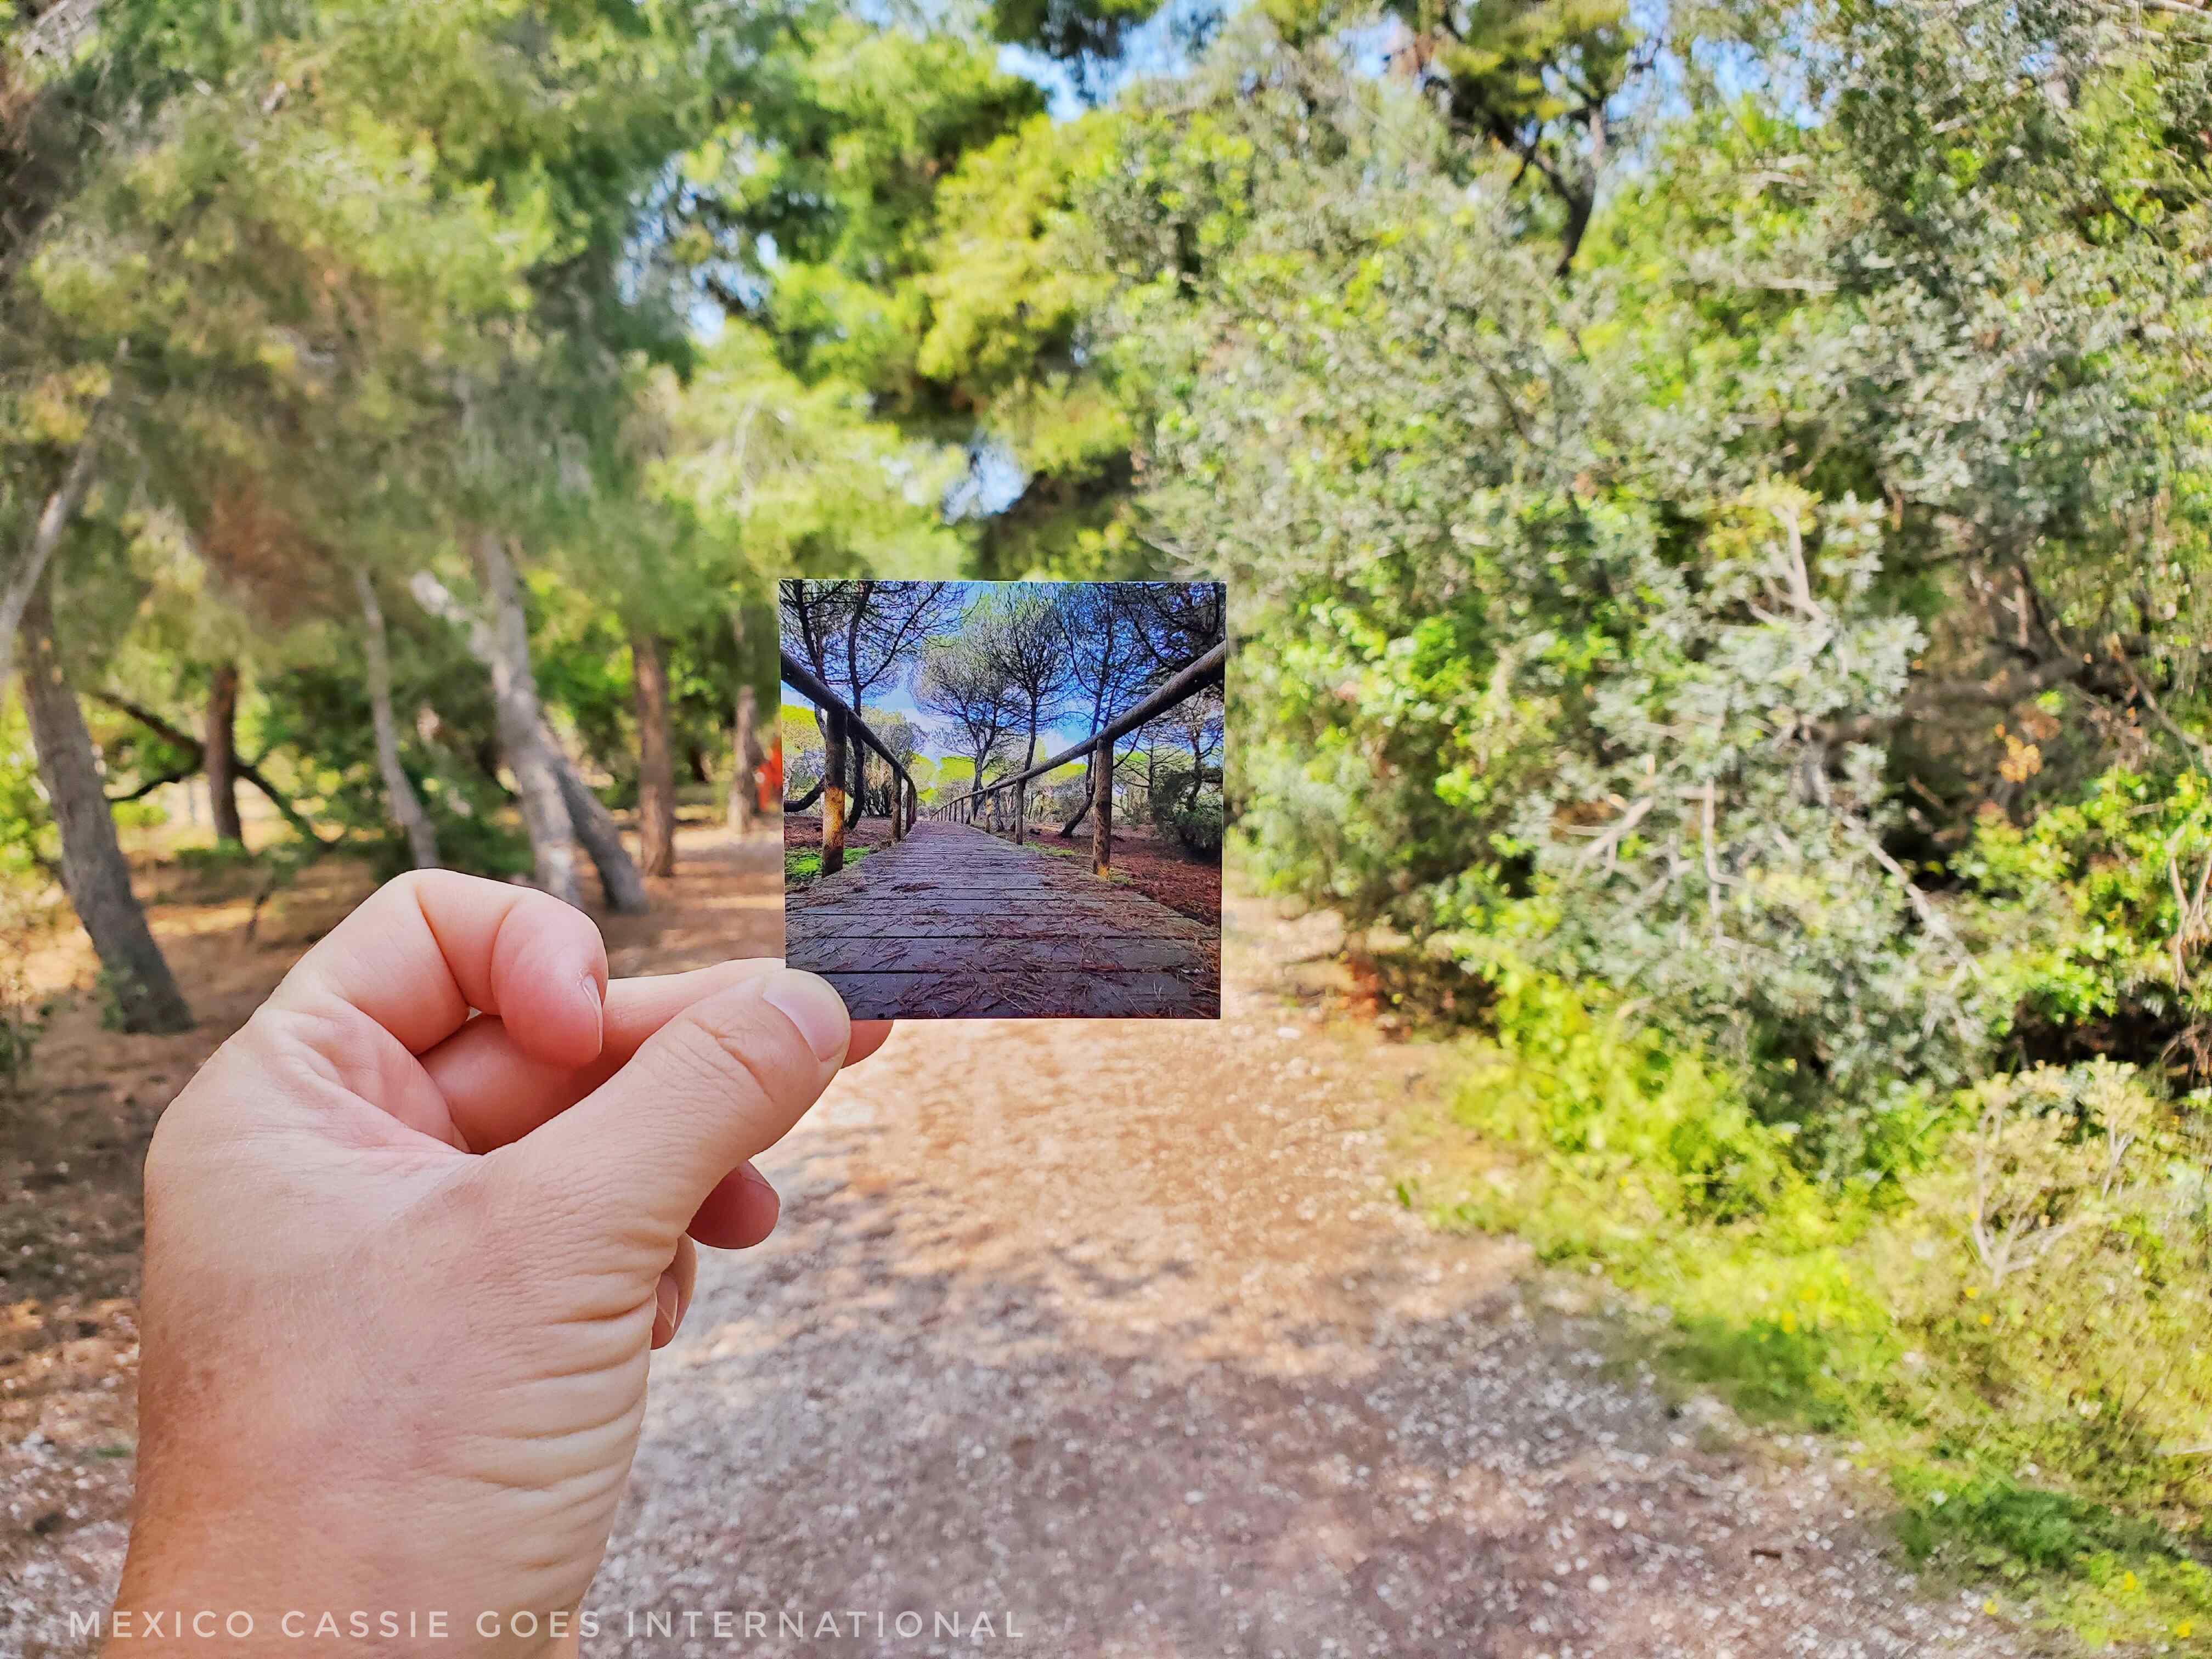 hand holding up square business card with photo of pine forest and wooden path. Background is pine forest and dirt path